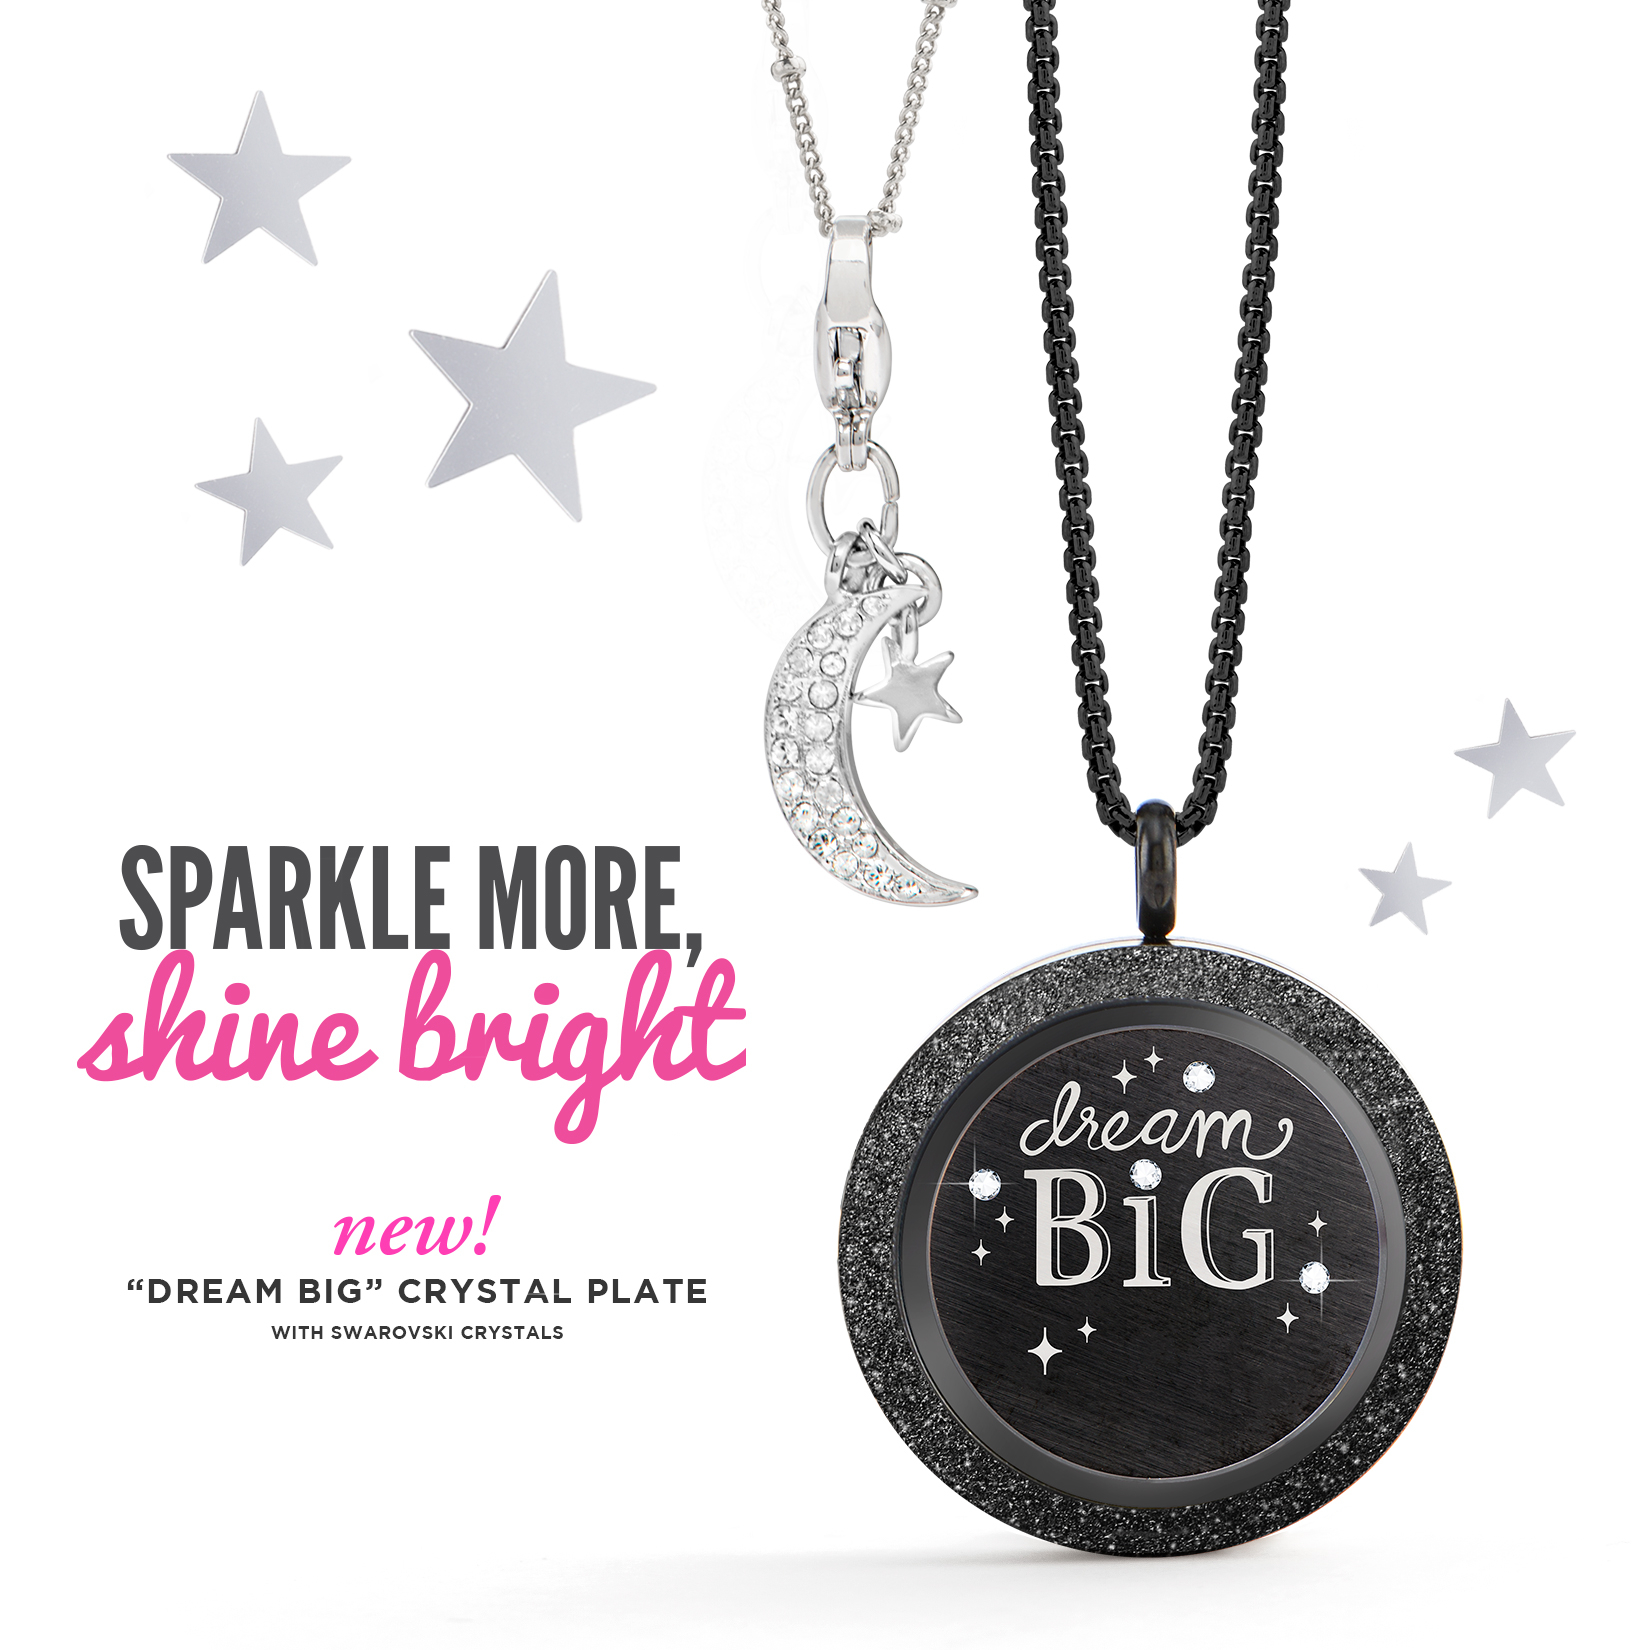 Origami Owl Family Origami Owl Fall Collection 2017 Convention Exclusives Direct